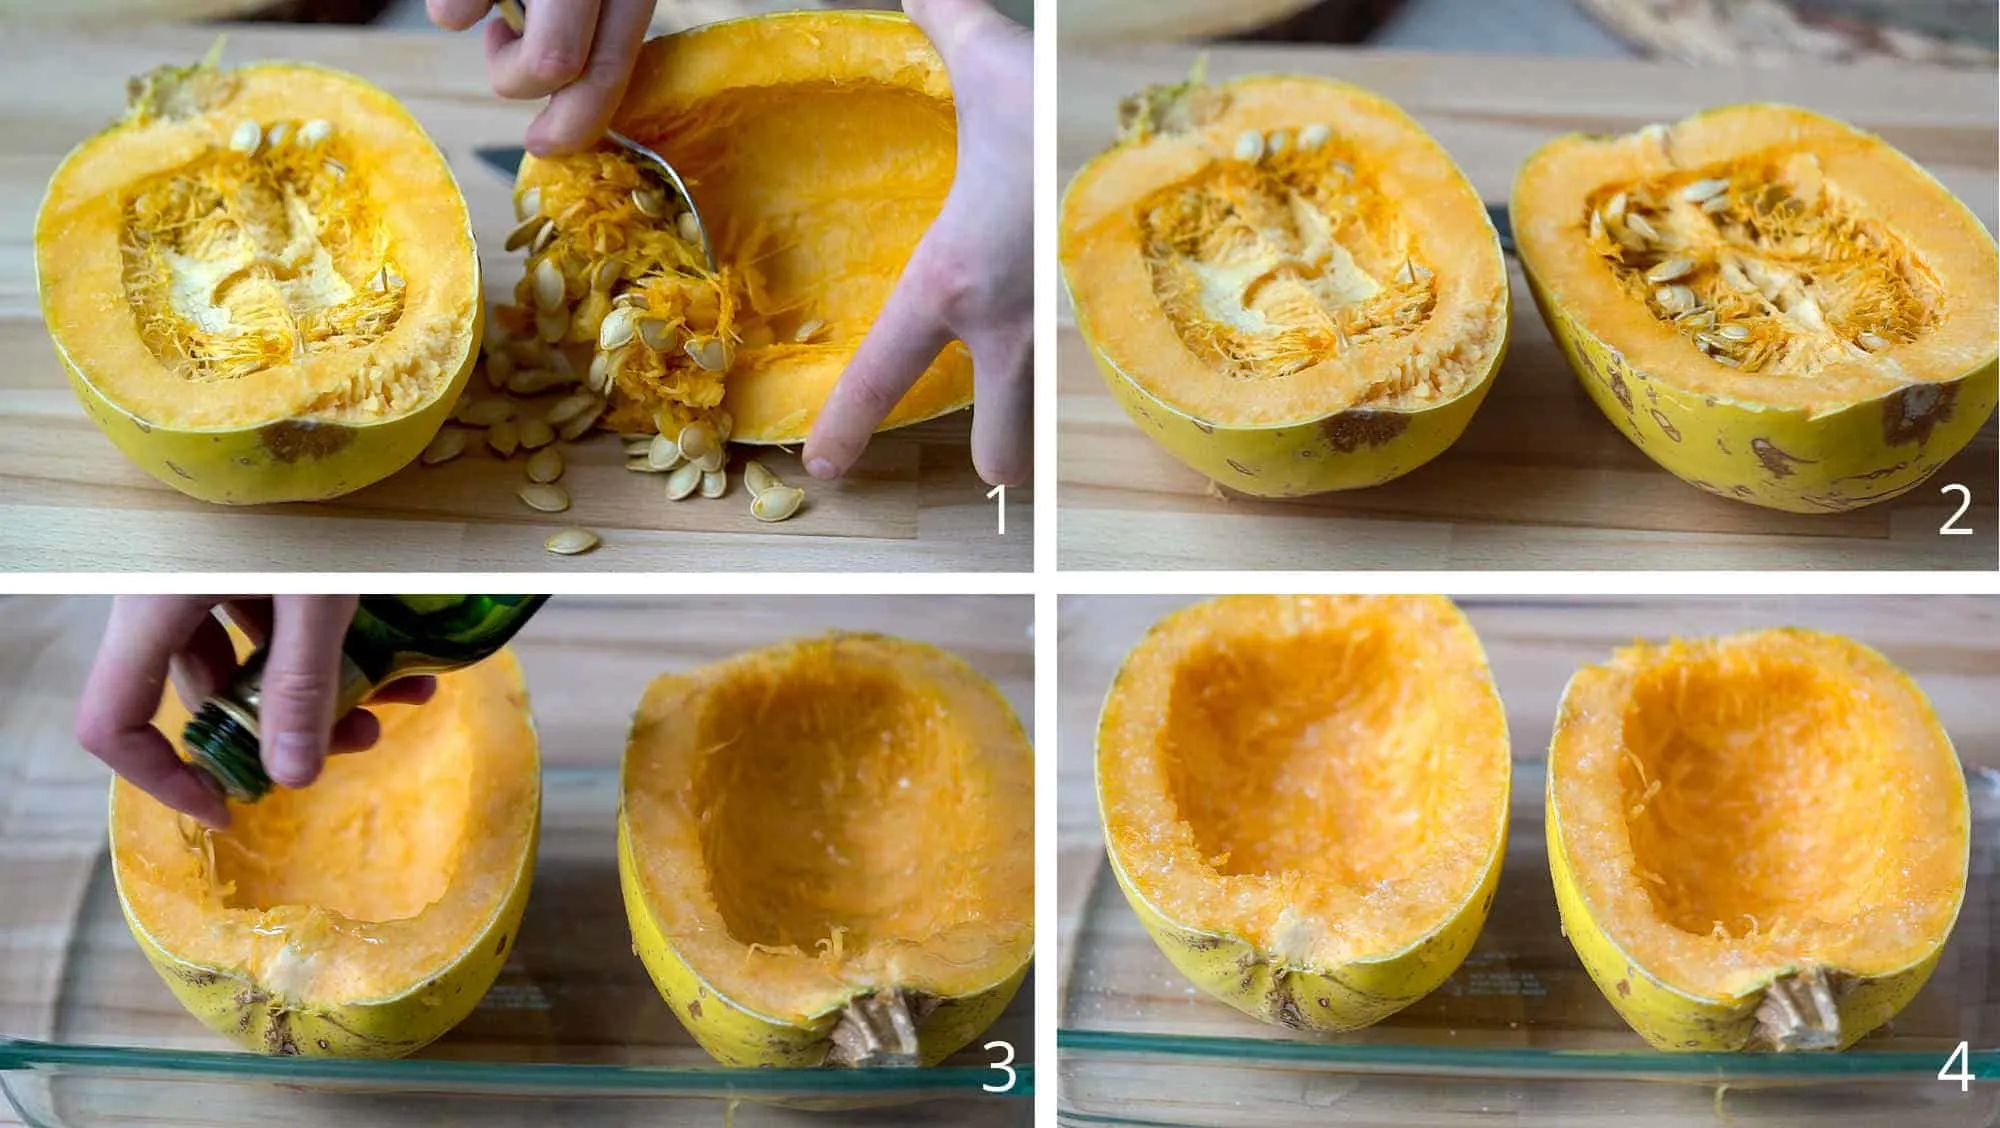 How to cut and prepare the spaghetti squash for oven baking